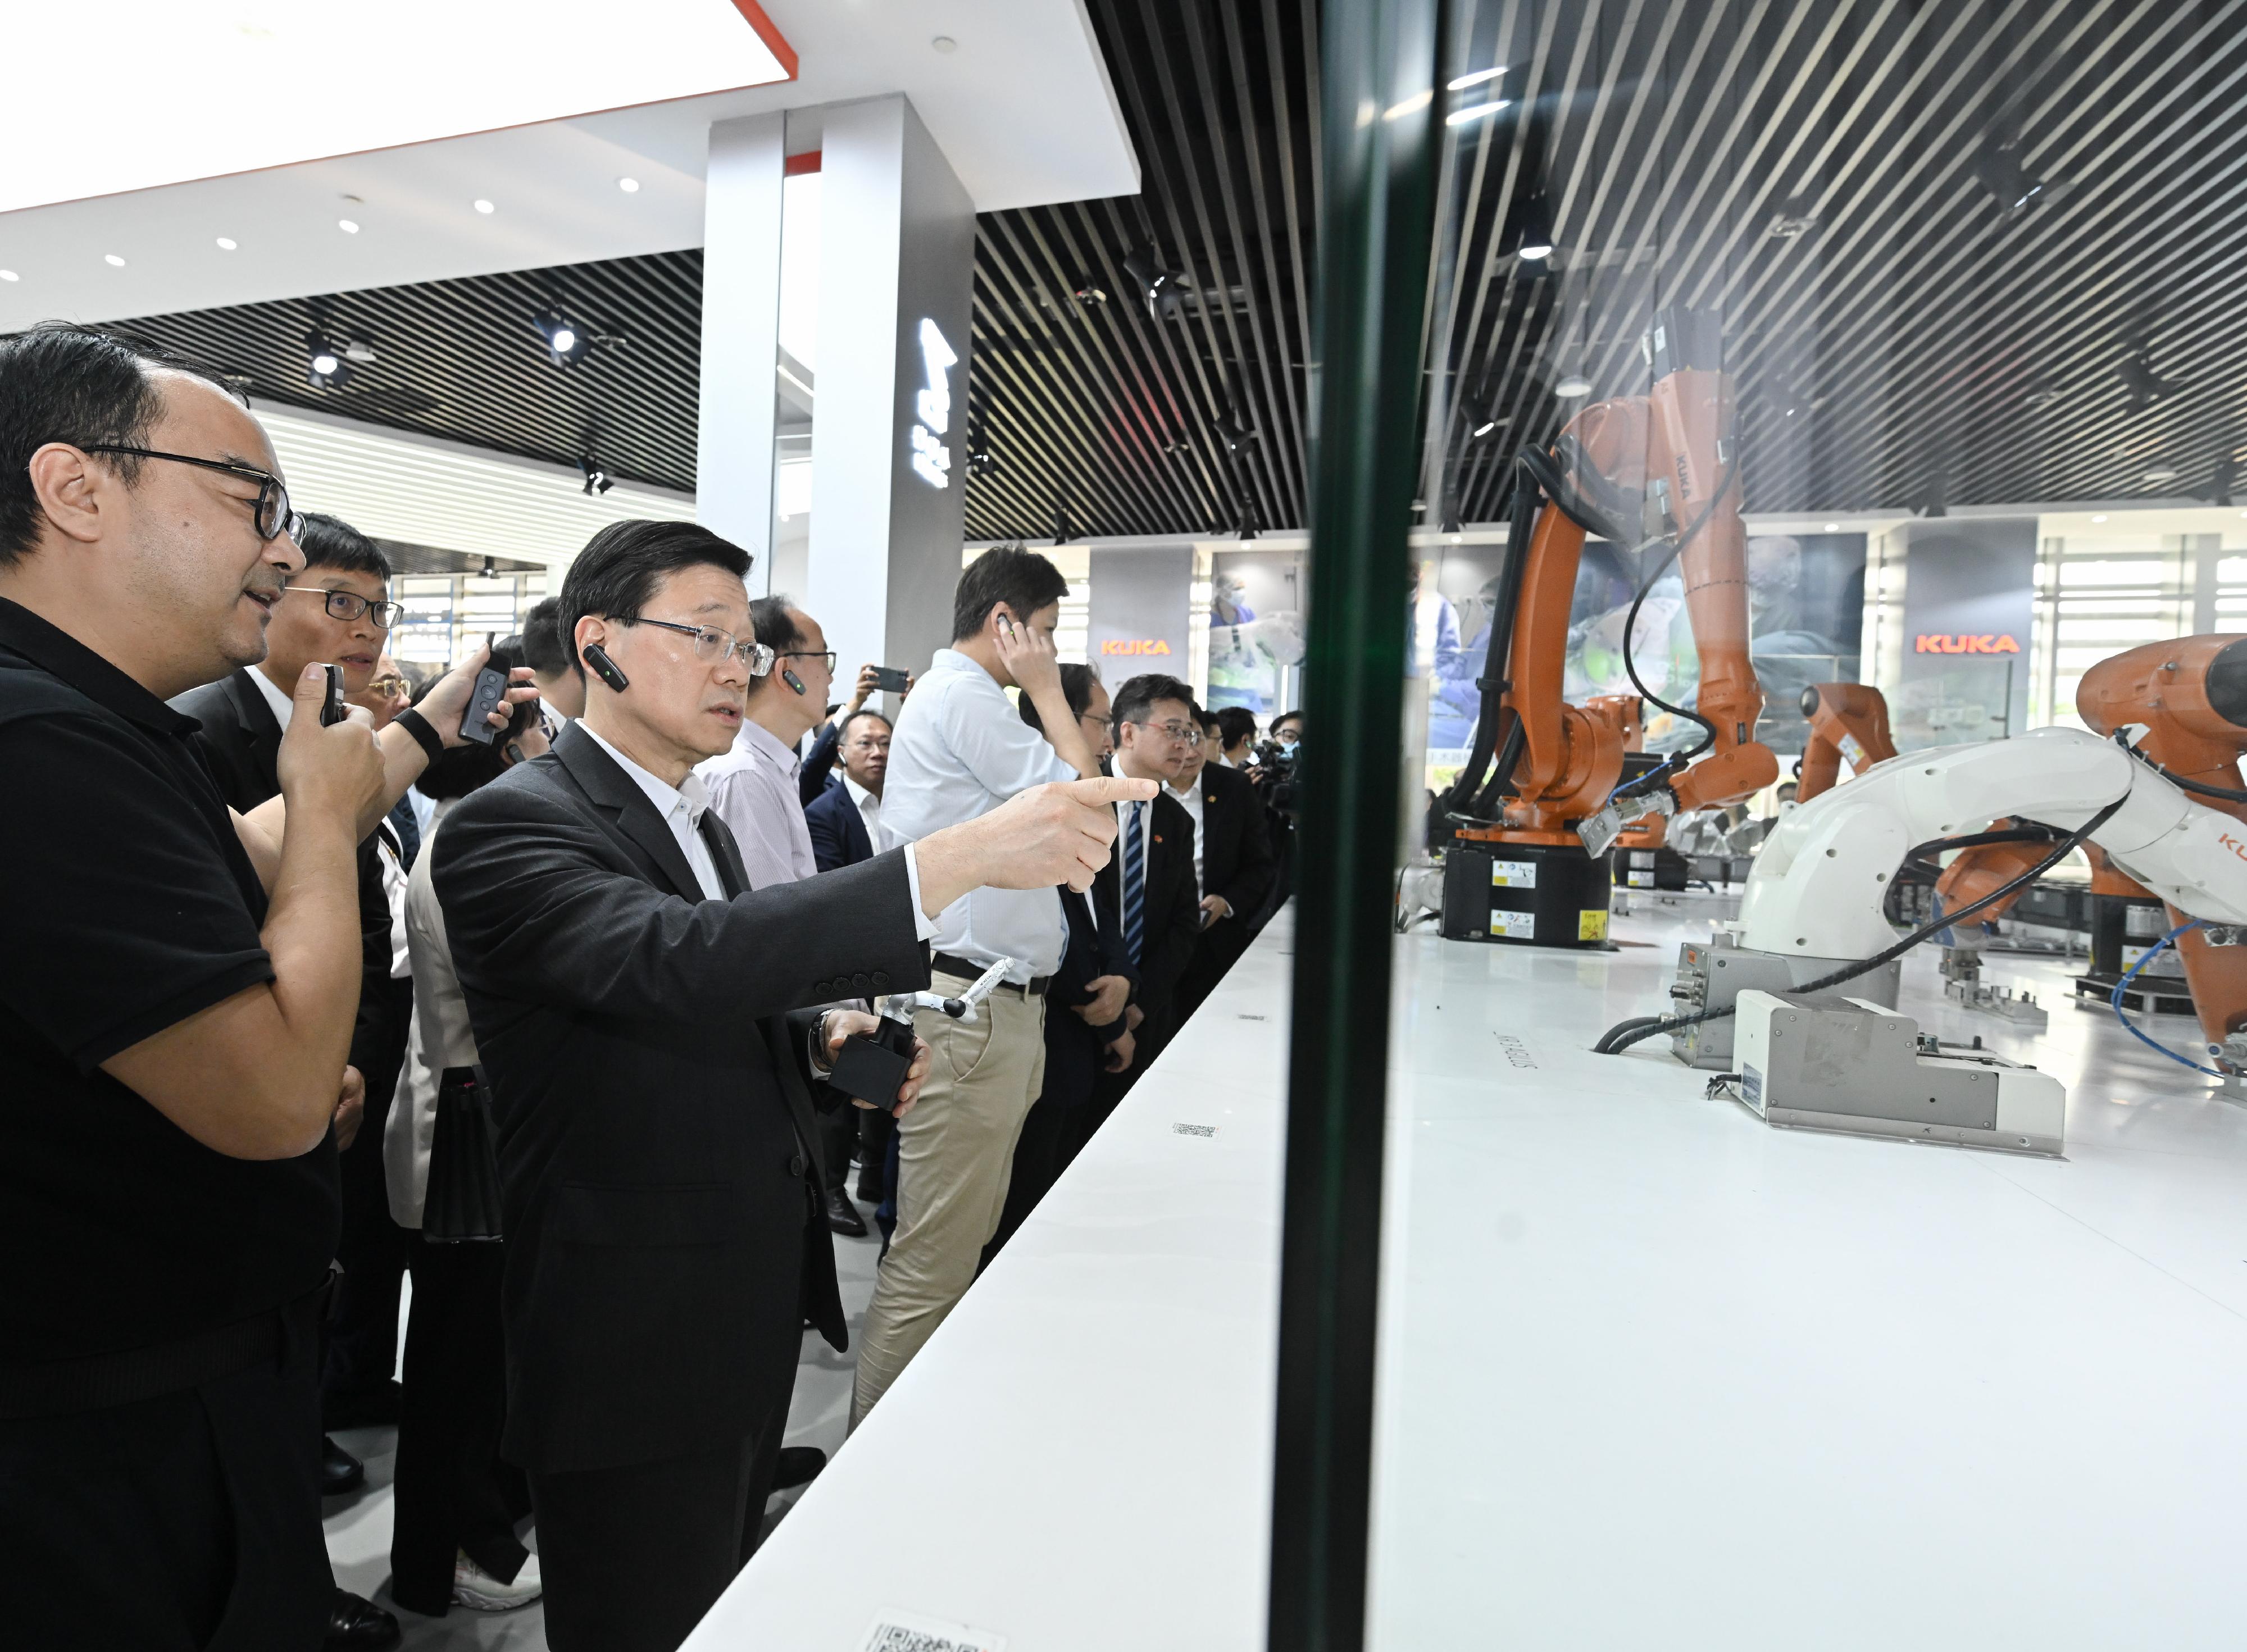 The delegation of the Hong Kong Special Administrative Region Government and the Legislative Council (LegCo) led by the Chief Executive, Mr John Lee, conducted their third-day visit in the Guangdong-Hong Kong-Macao Greater Bay Area today (April 23). Photo shows Mr Lee (second left) receiving a briefing by a representative of the KUKA Robotics Guangdong Co., Ltd. on the operation of robotic arm.